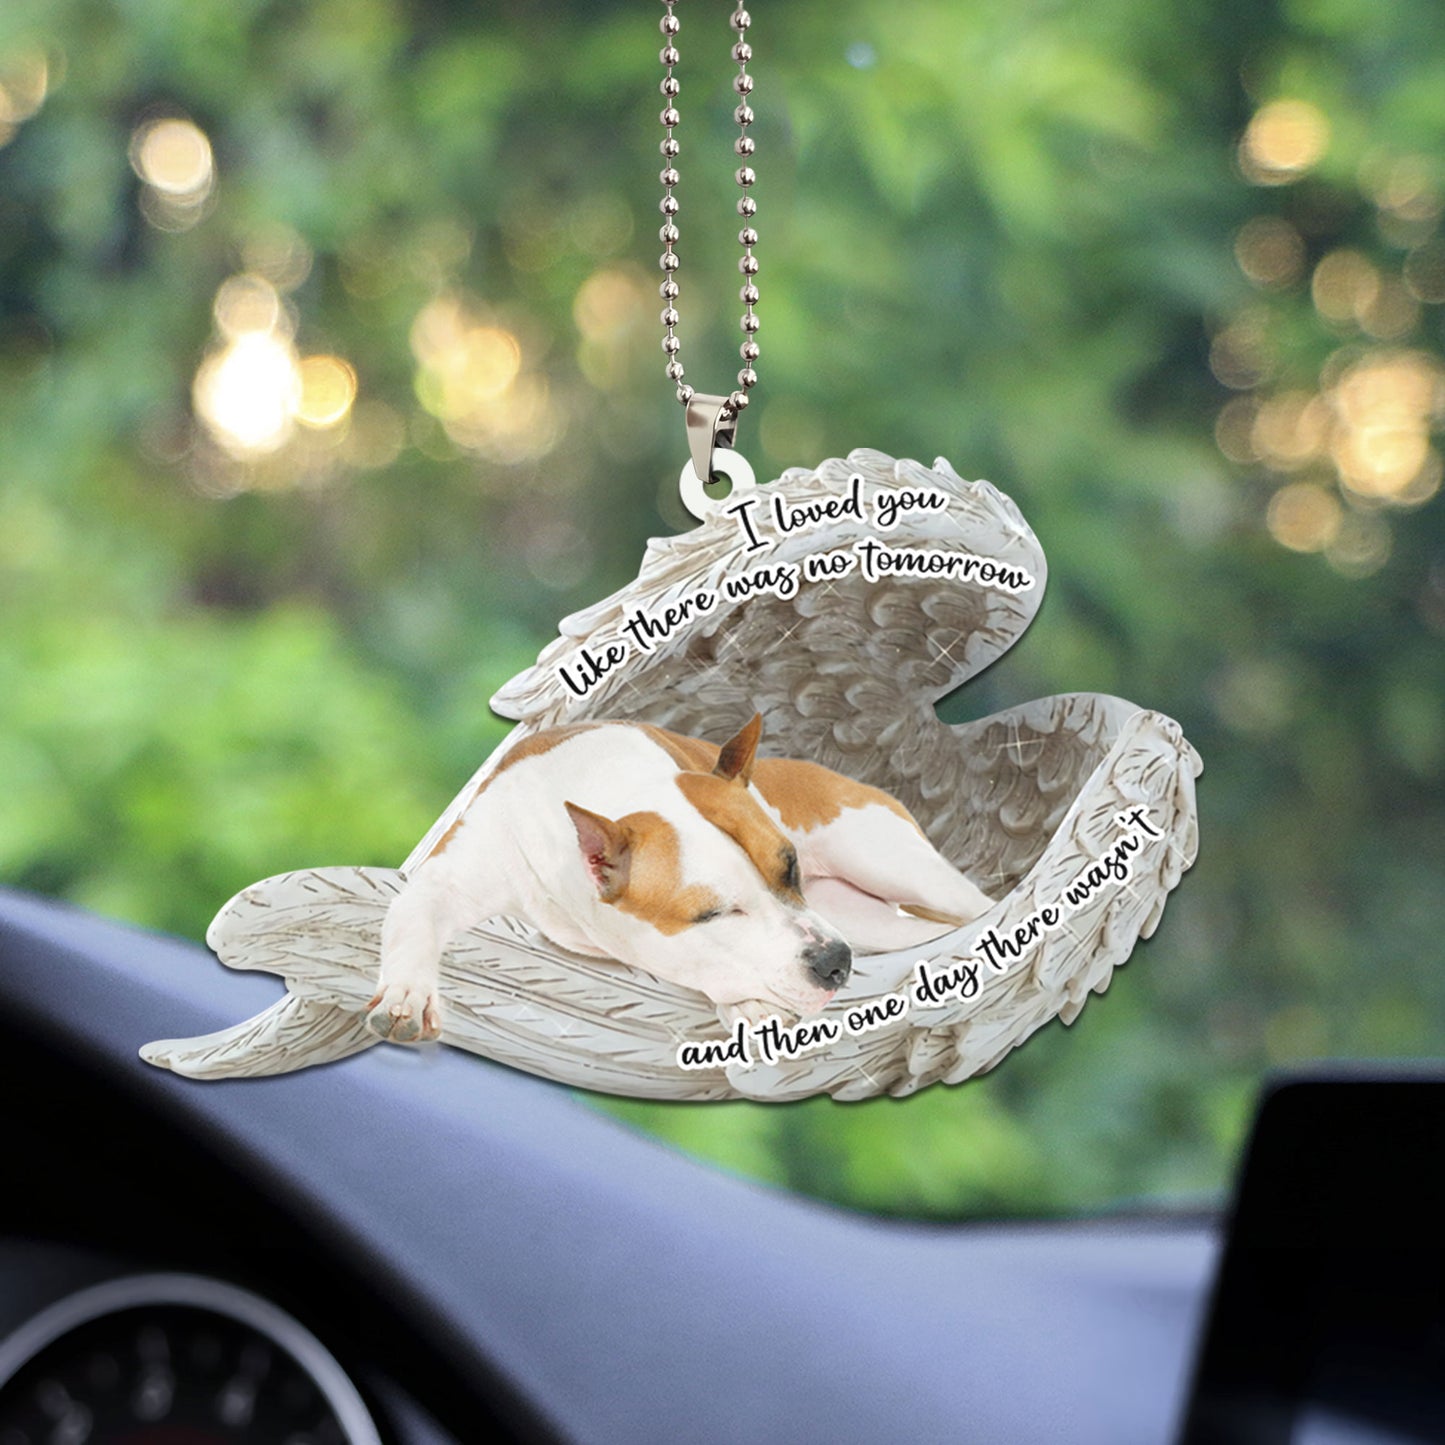 American Staffordshire Terrier Sleeping Angel Personalizedwitch Flat Car Ornament